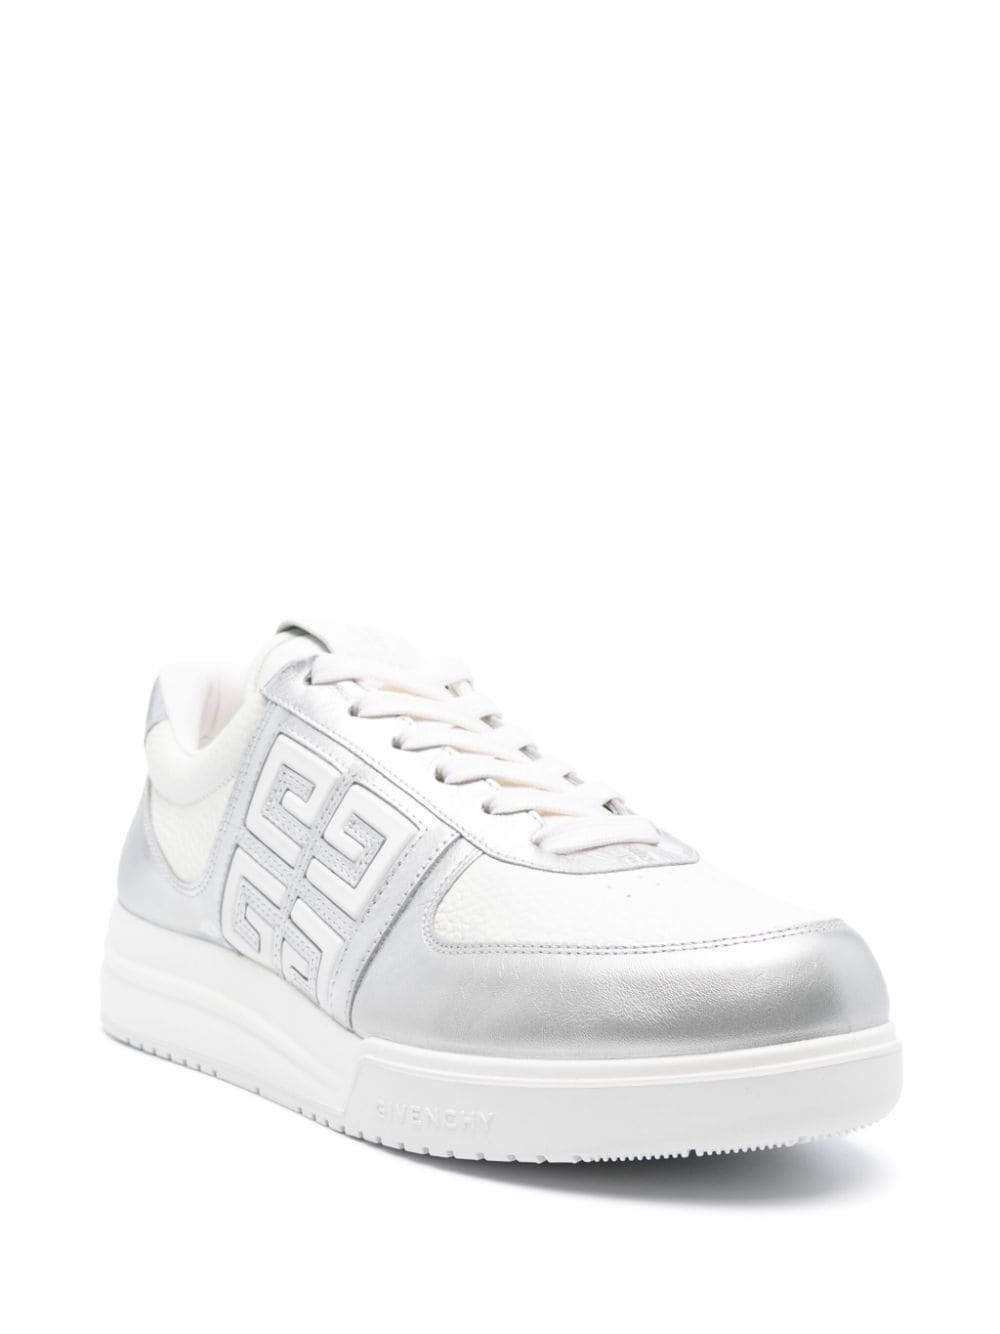 4G-embellished leather sneakers - 2